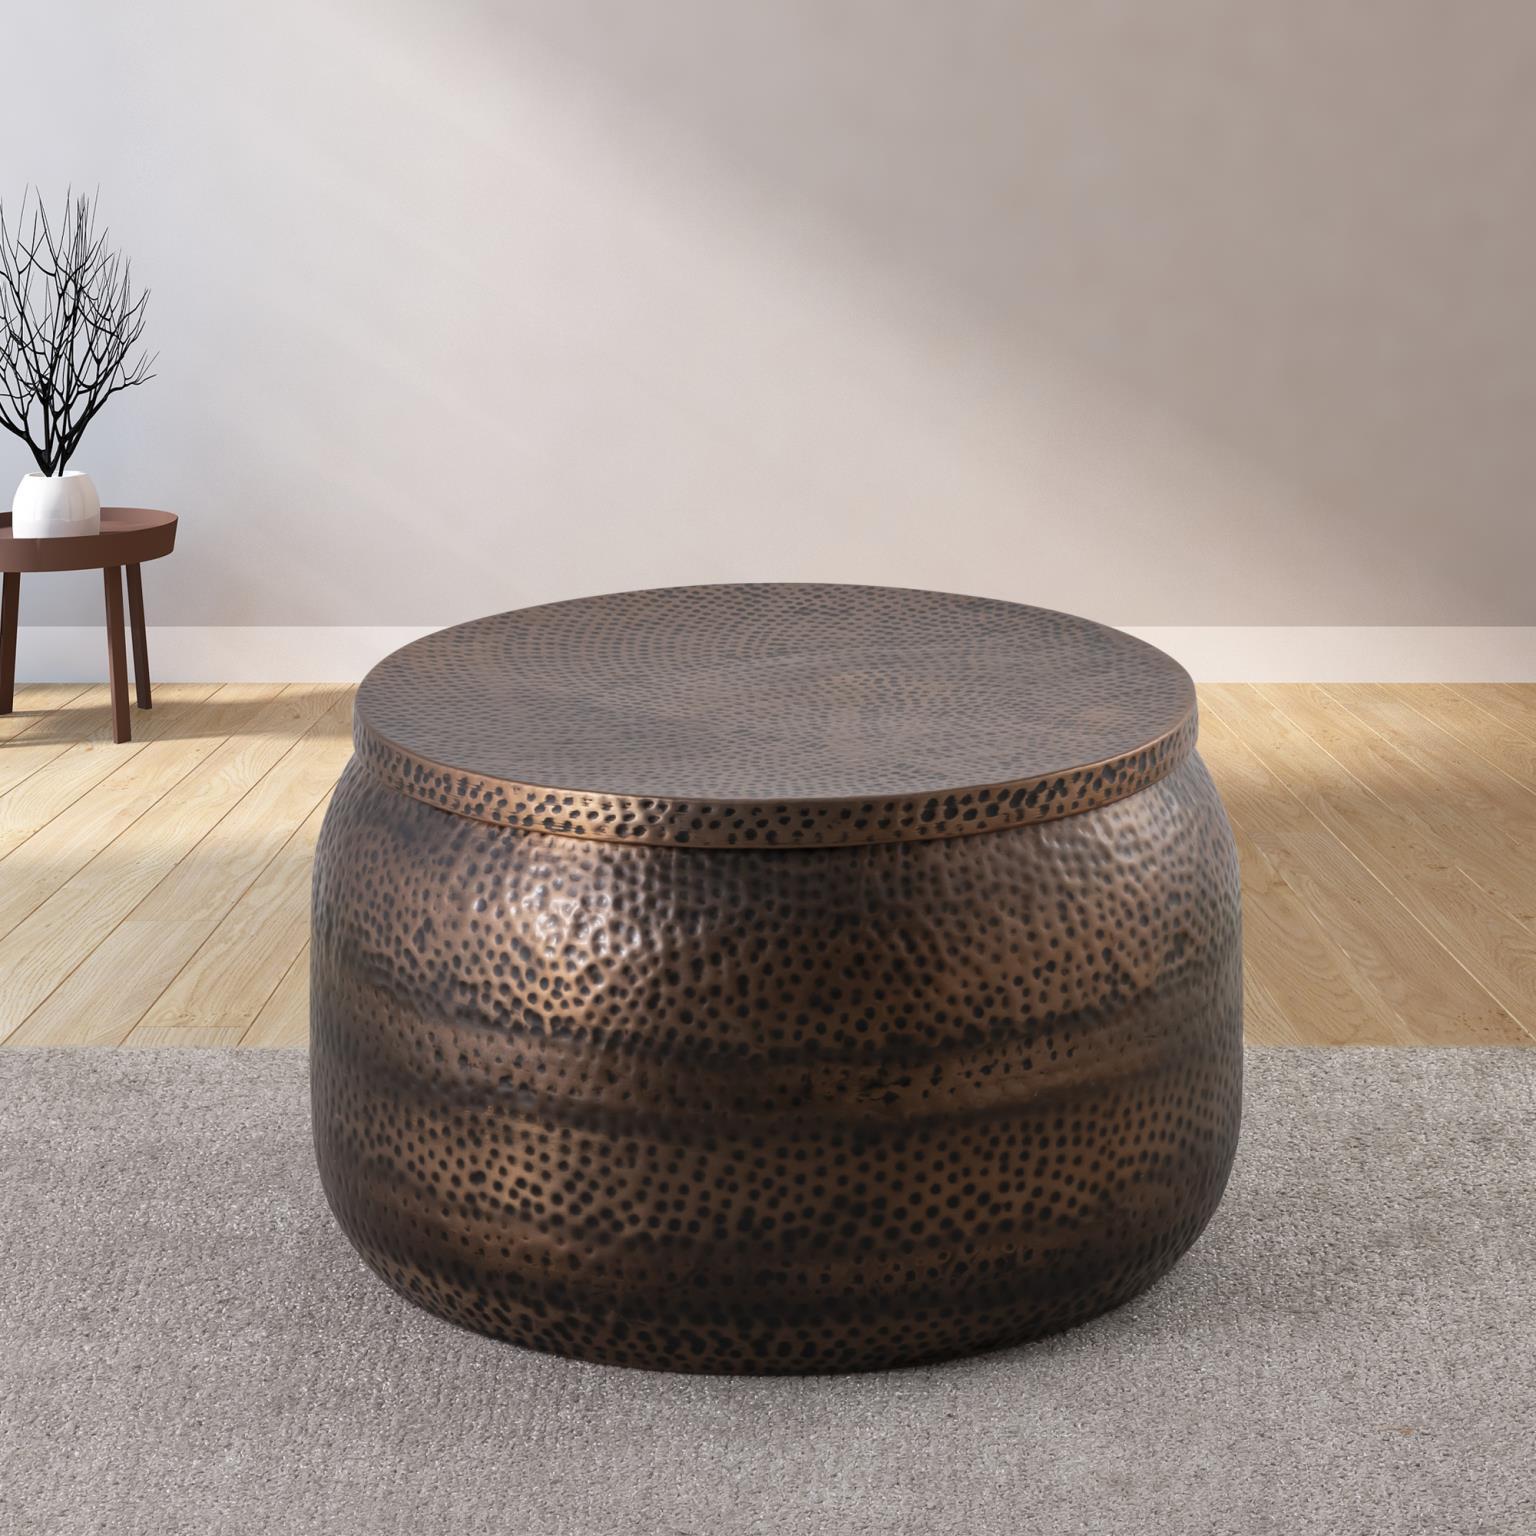 Contemporary, Modern Coffee Table T3368-26 Drum Coffee Table 718852652604 718852652604 in Copper 